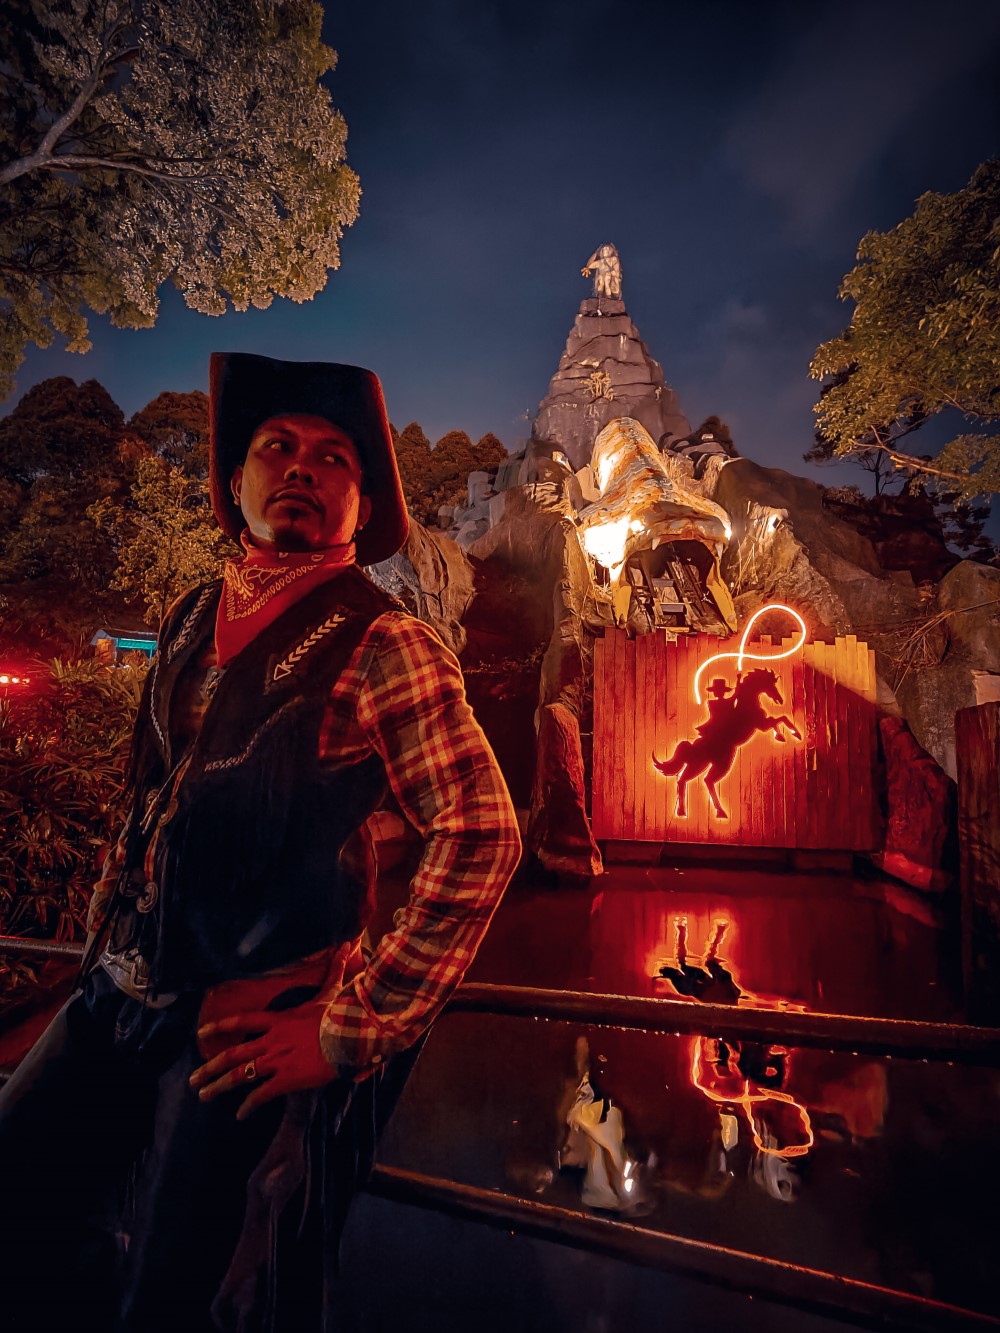 A portrait of Sunway Lagoon’s cowboy posing afront Wow Wild West Night Park’s star attraction.